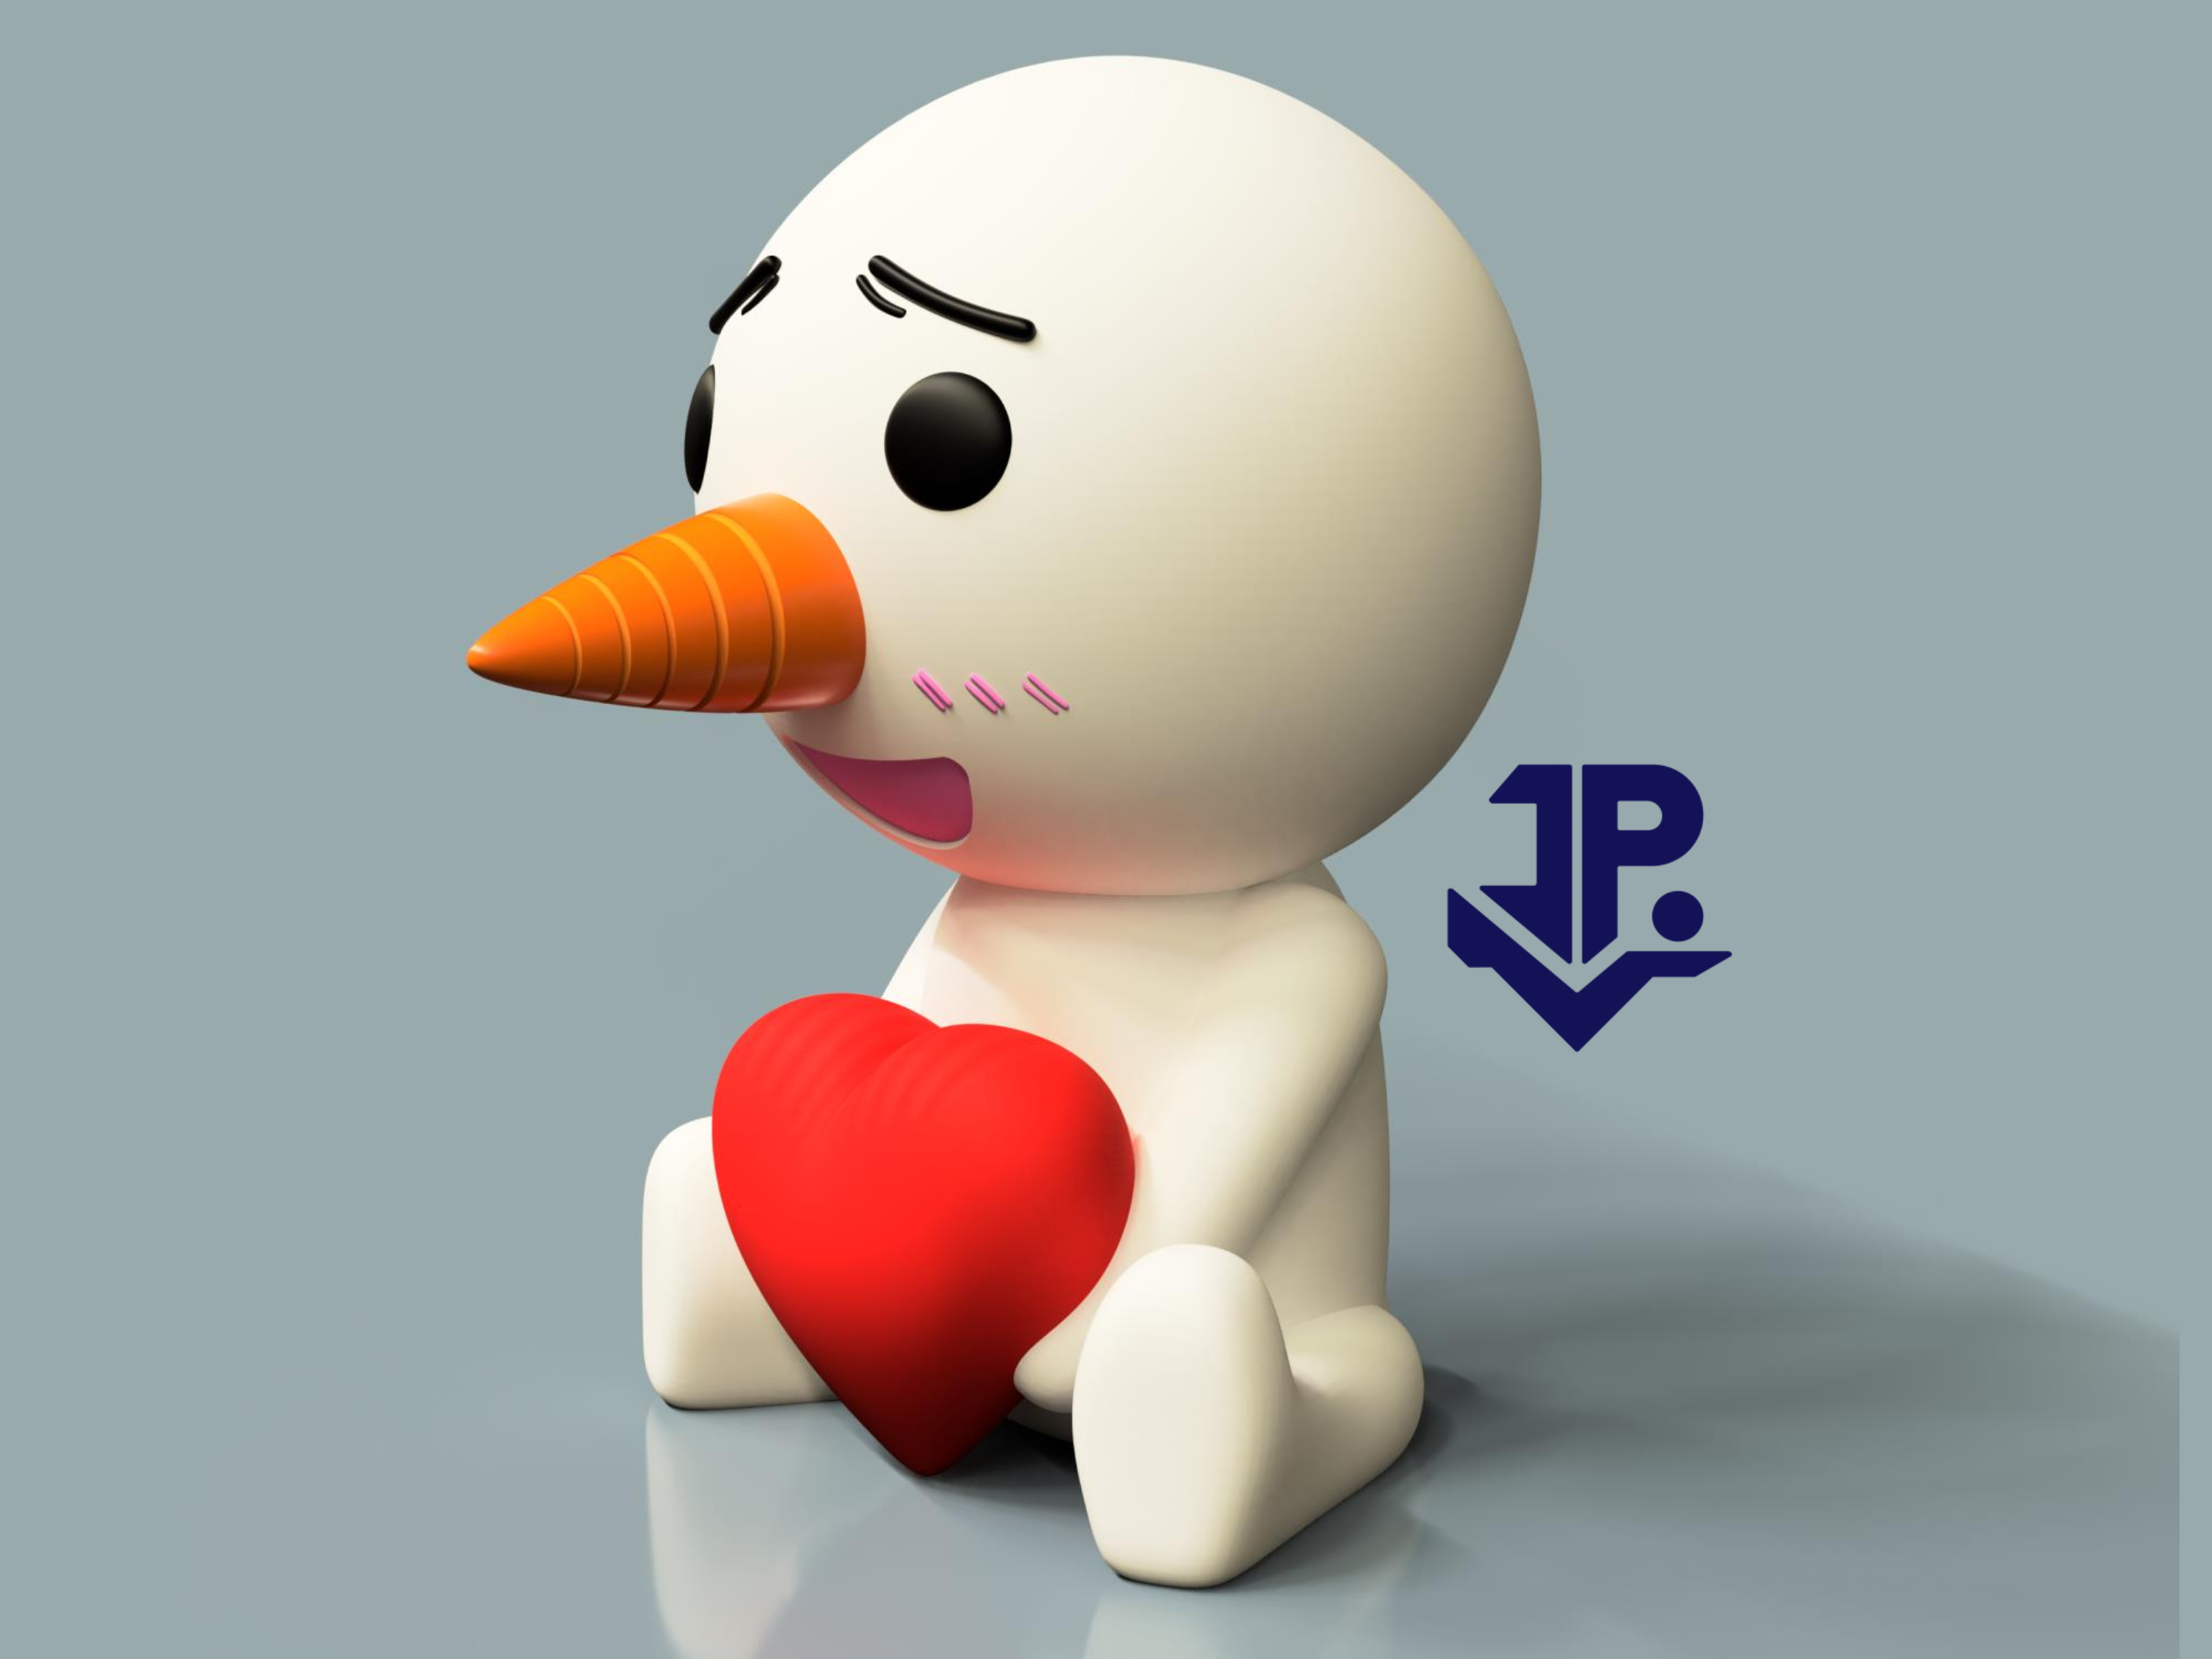 2022-CULTS_008.png Download STL file PLUE_FAIRY TAIL_HEART_SPIRIT_CHIBI_LUCY_NATSU • 3D printable design, JeiPi3D